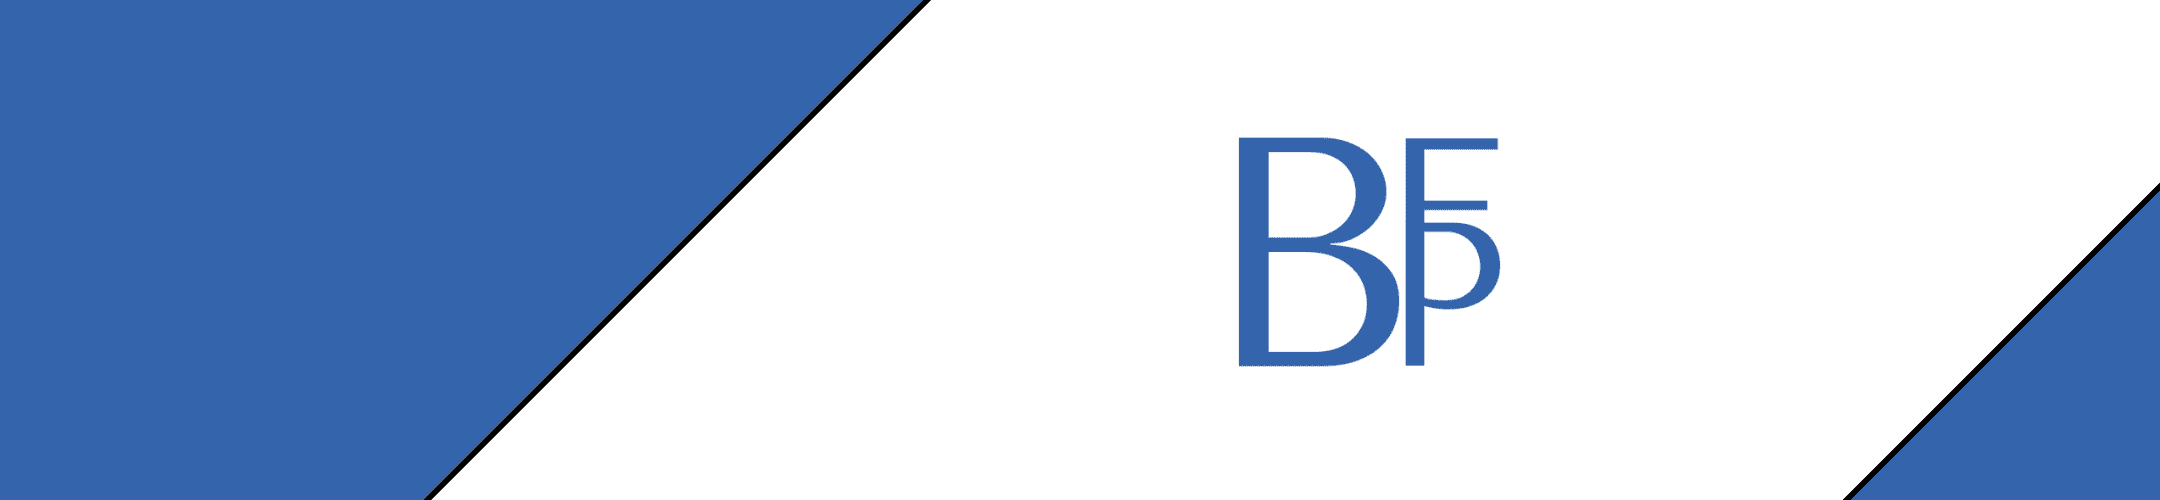 Abstract geometric design with a split blue and white background, featuring stylized letters 'bf' positioned in the center.